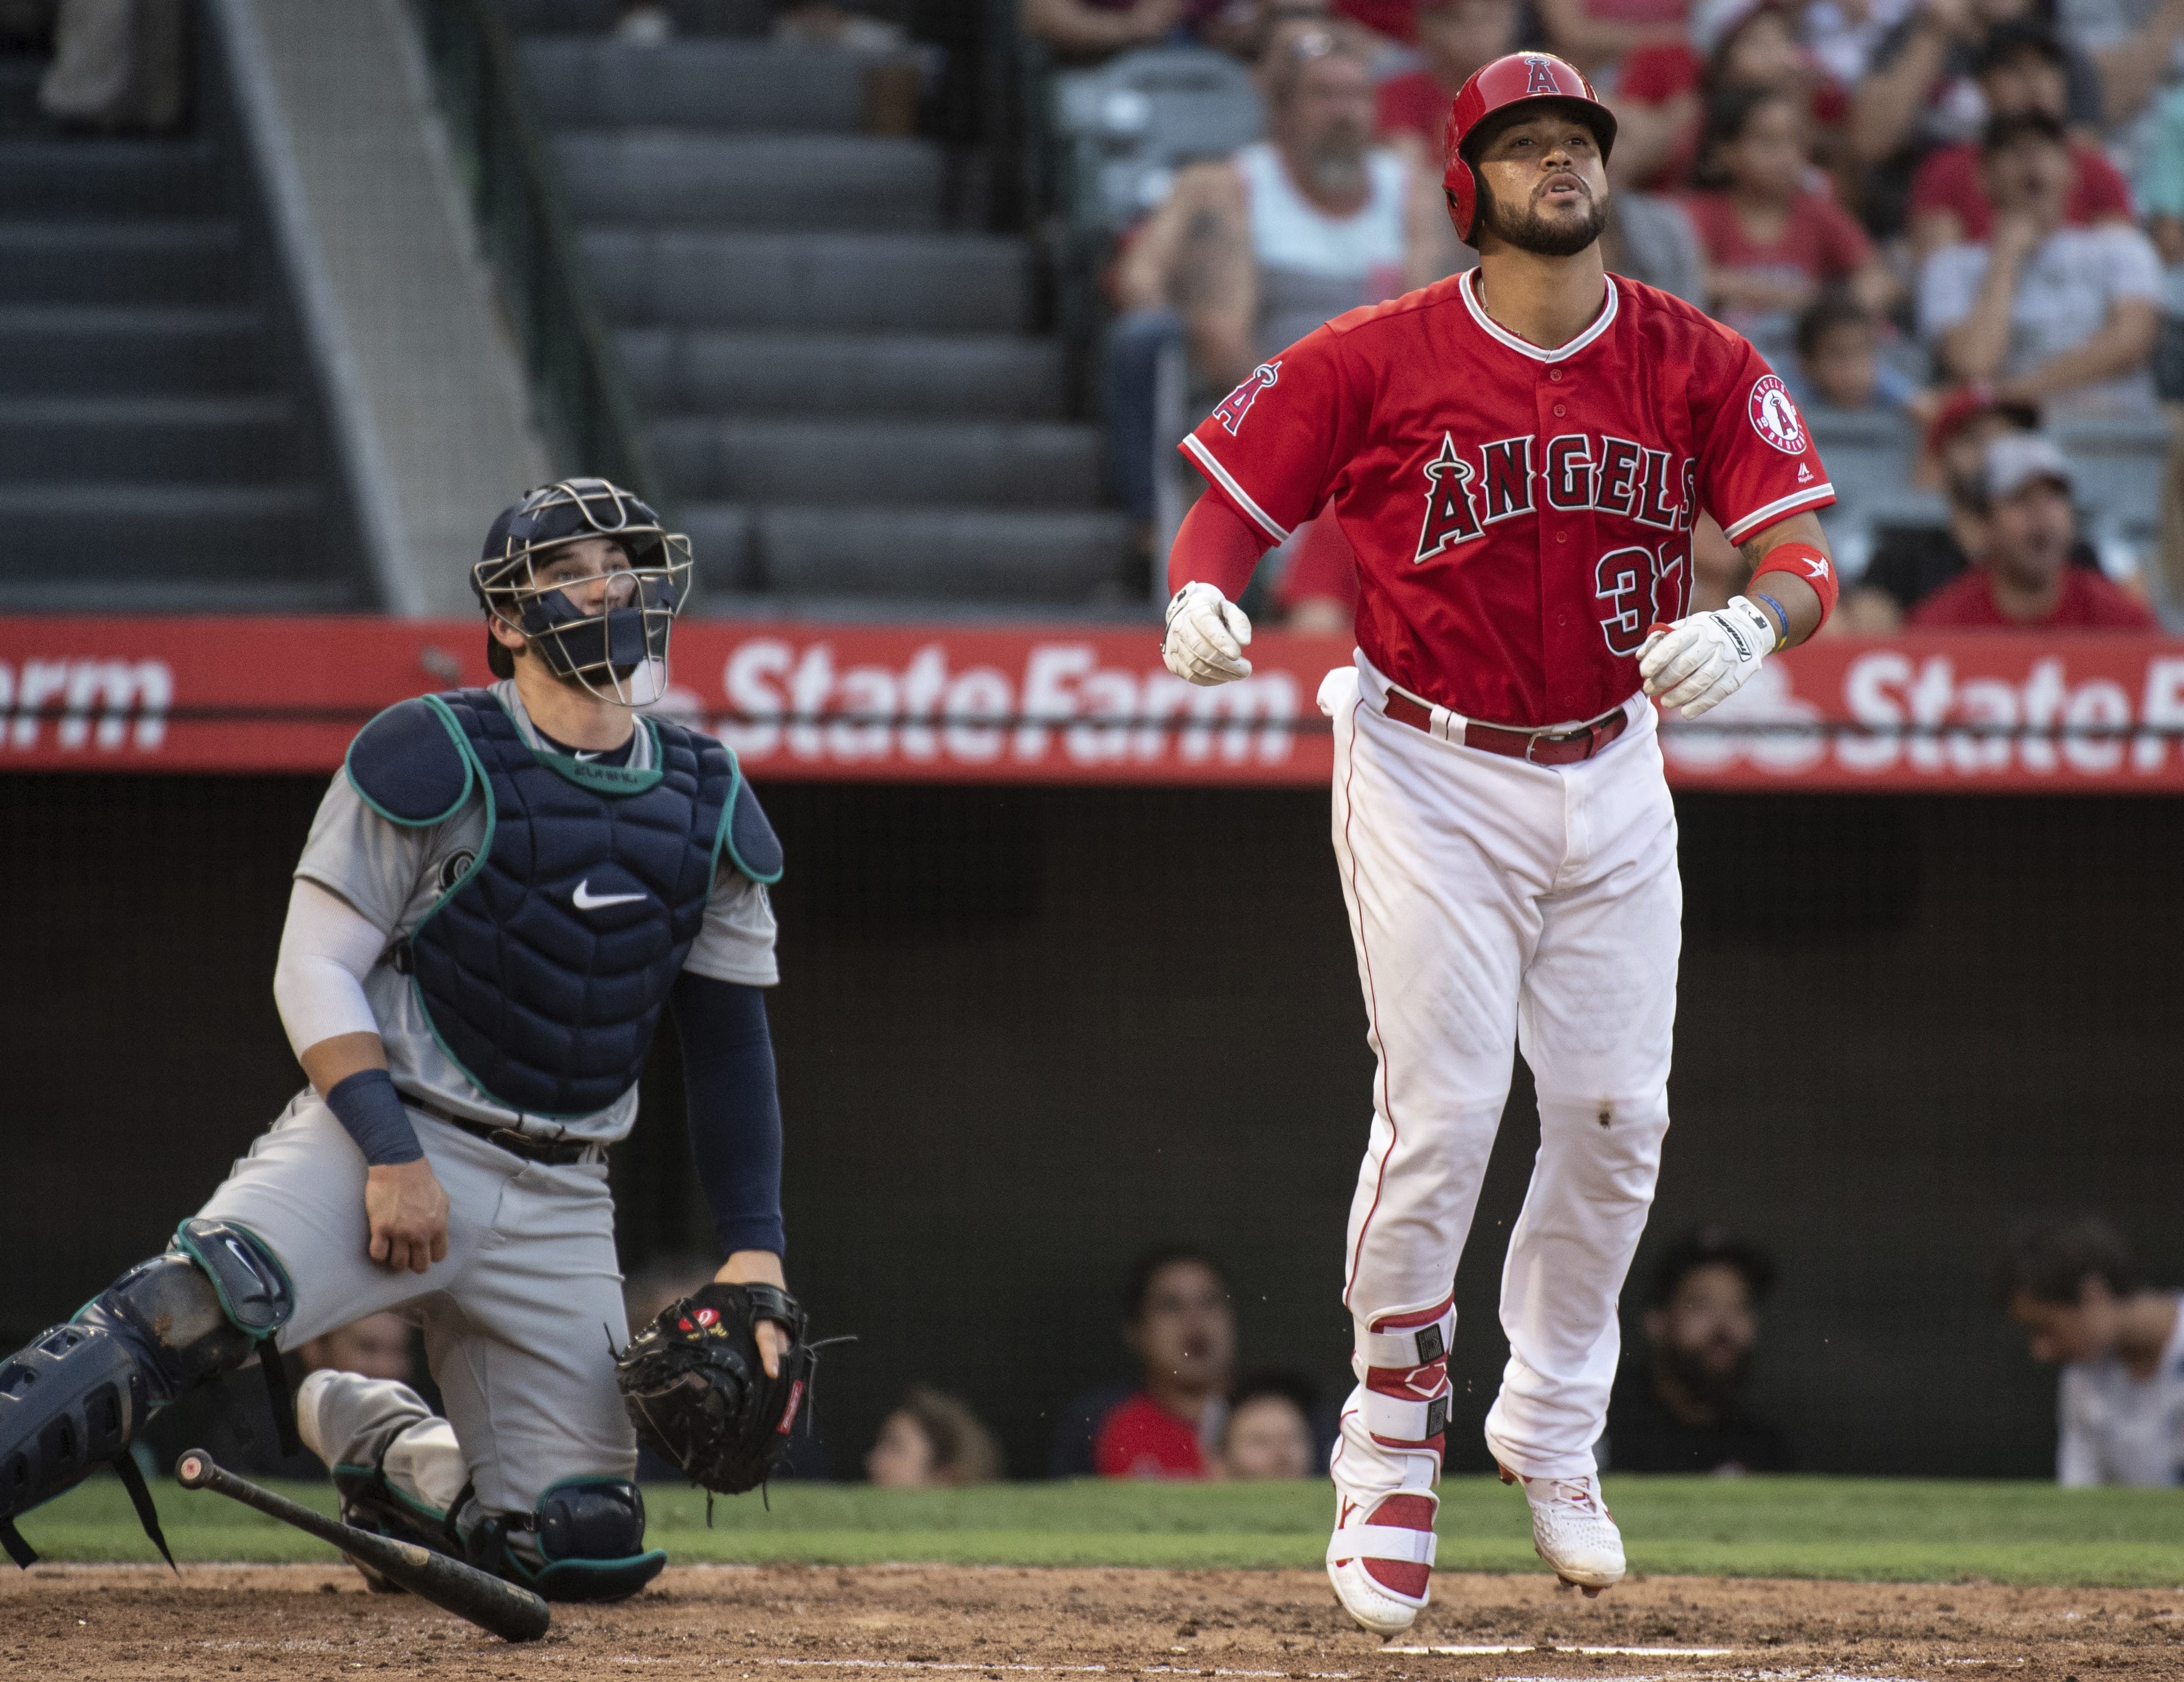 Record-setting debut by Angels rookie helps beat Mariners - The Columbian